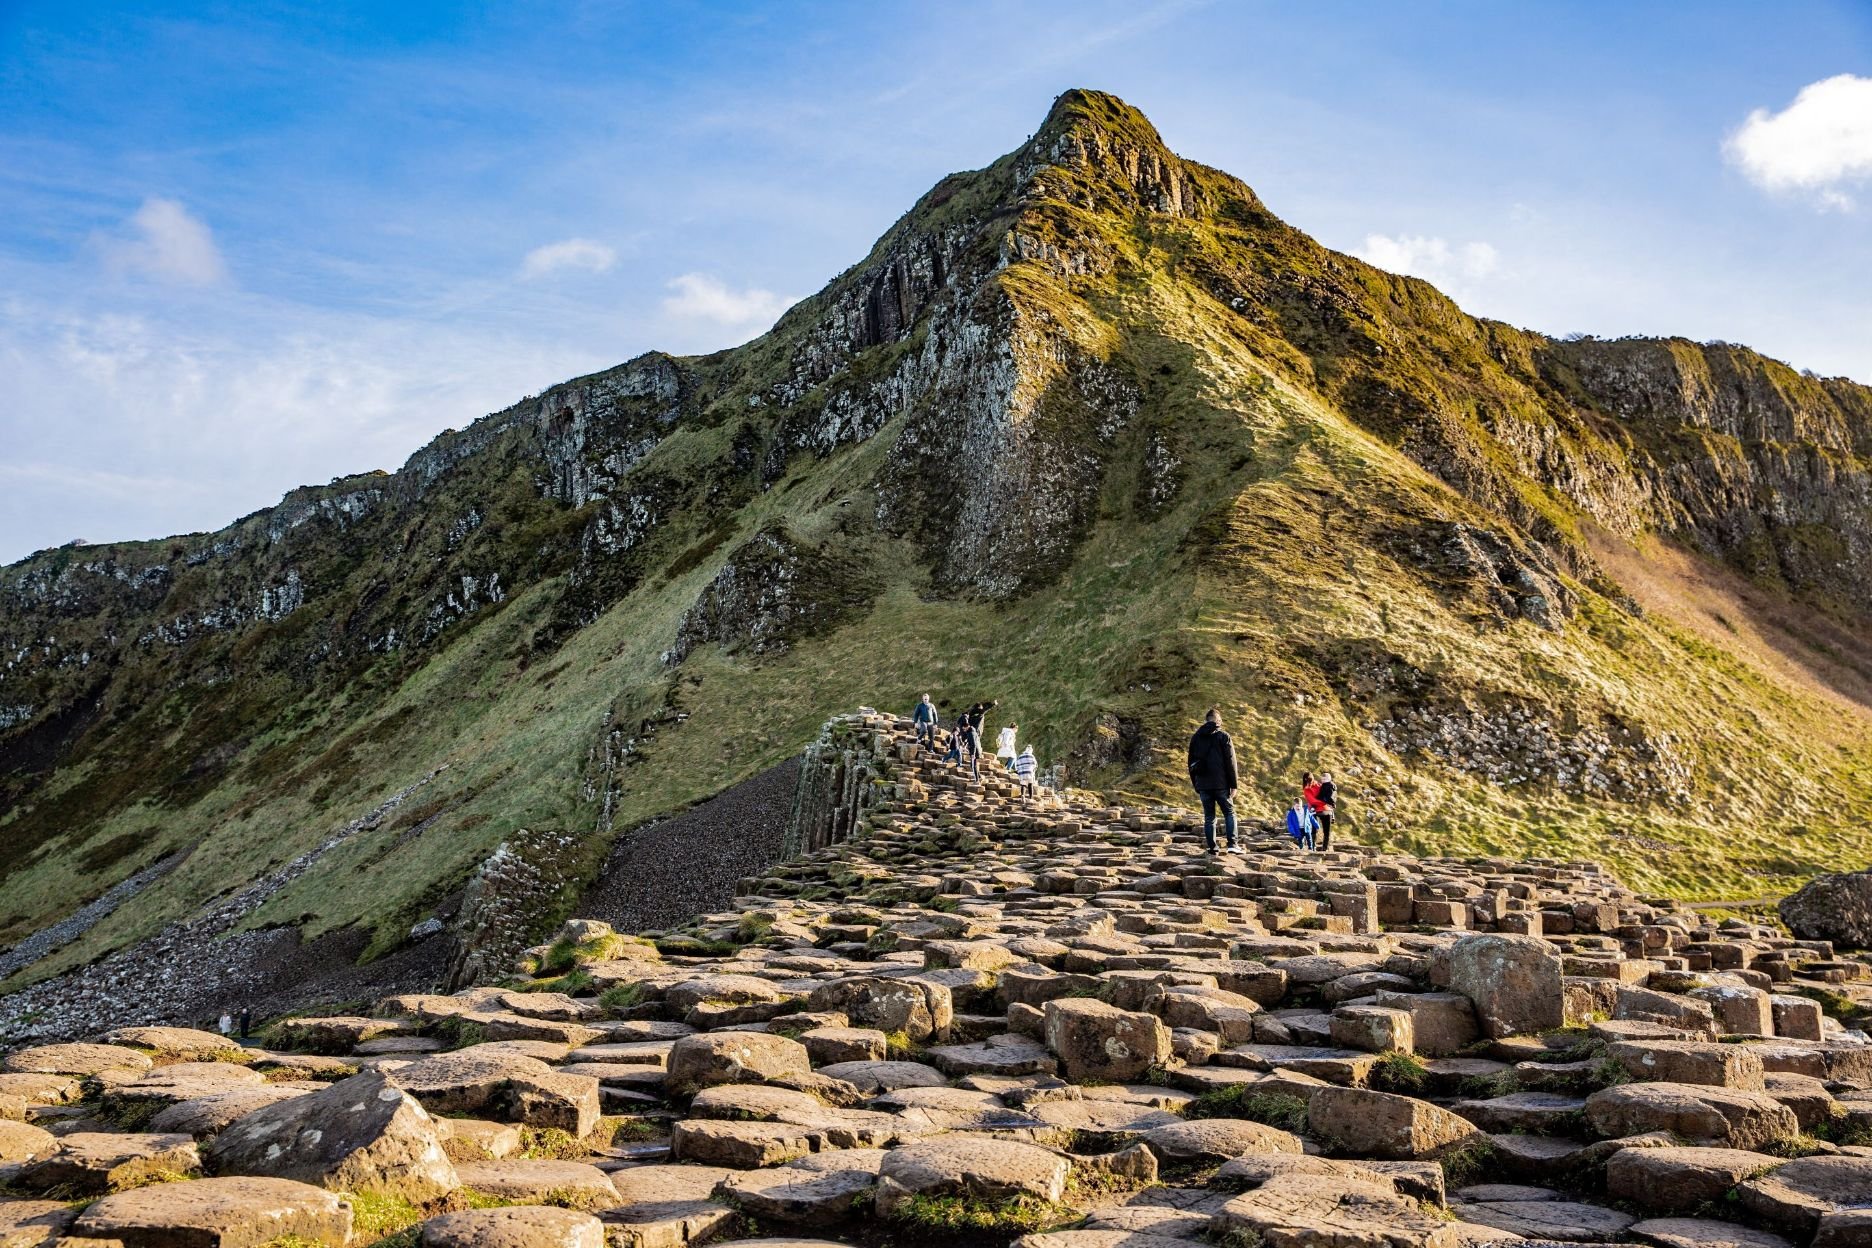 The stunning Giant’s Causeway on the coast of Northern Ireland